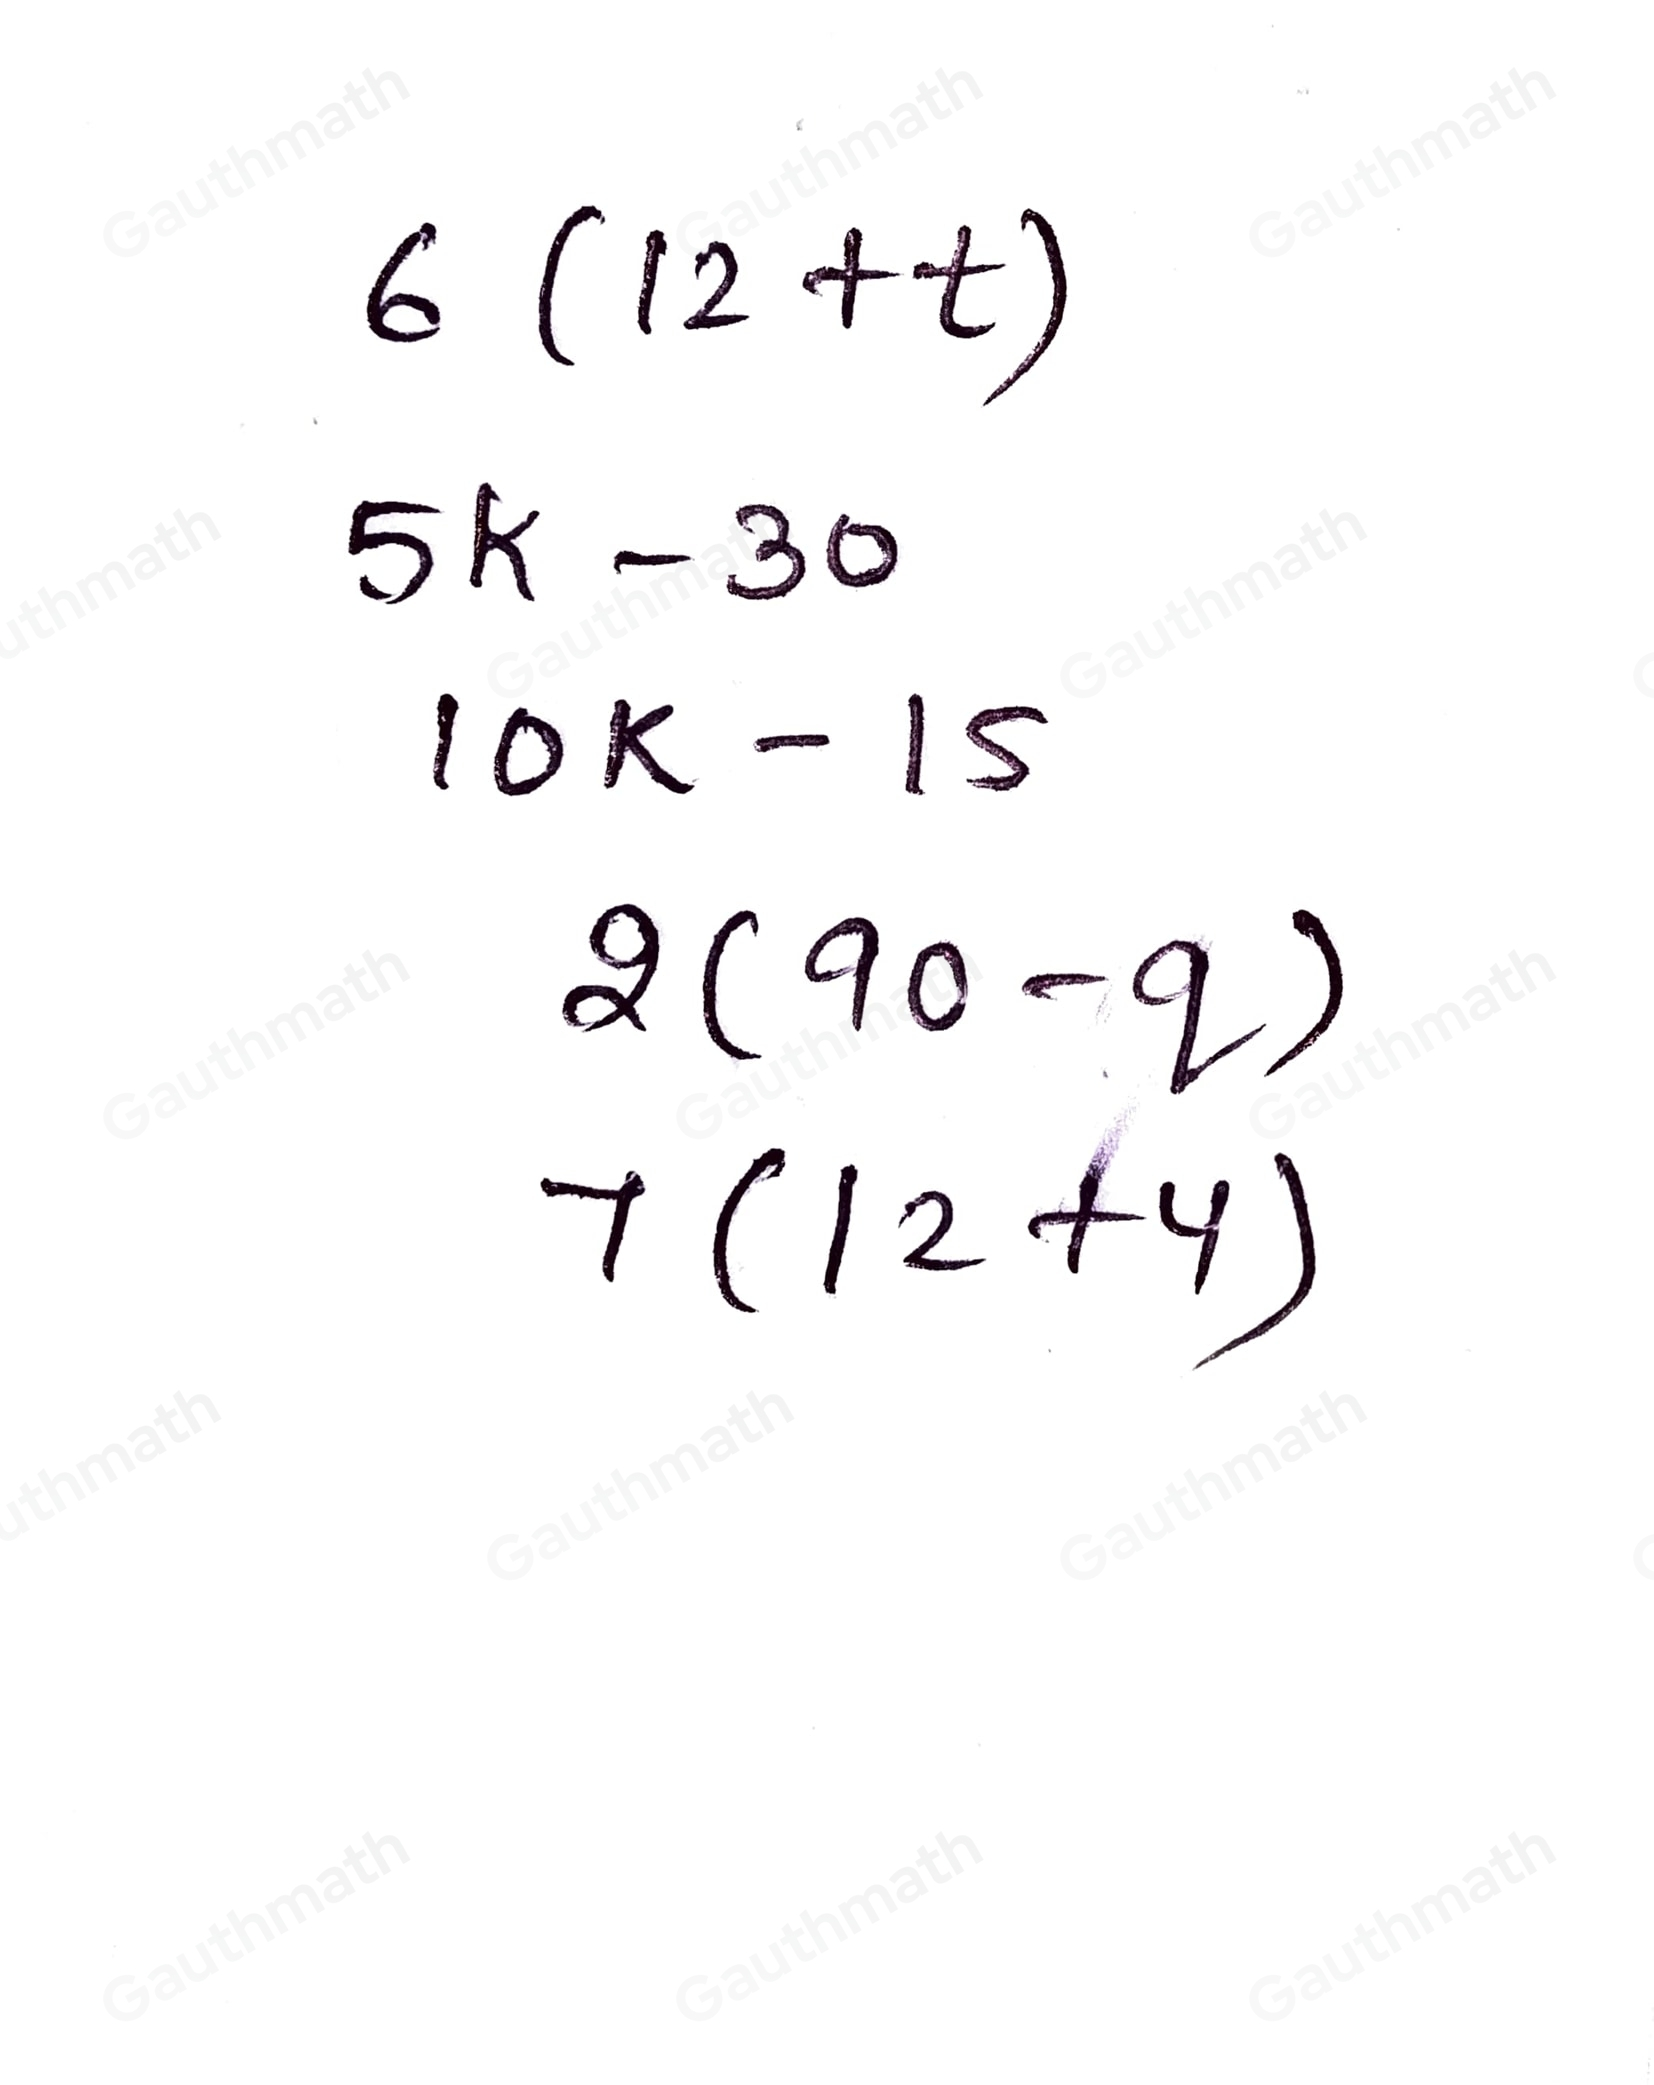 SET C1 C.1. Translate the following word phrases into algebraic expressions. 1.six times the sum of twelve and t. 2. thirty taken from five times k 3. fifteen subtracted from ten times k 4.twice the difference between ninety and q 5. seven multiplied to the sum of twelve and four